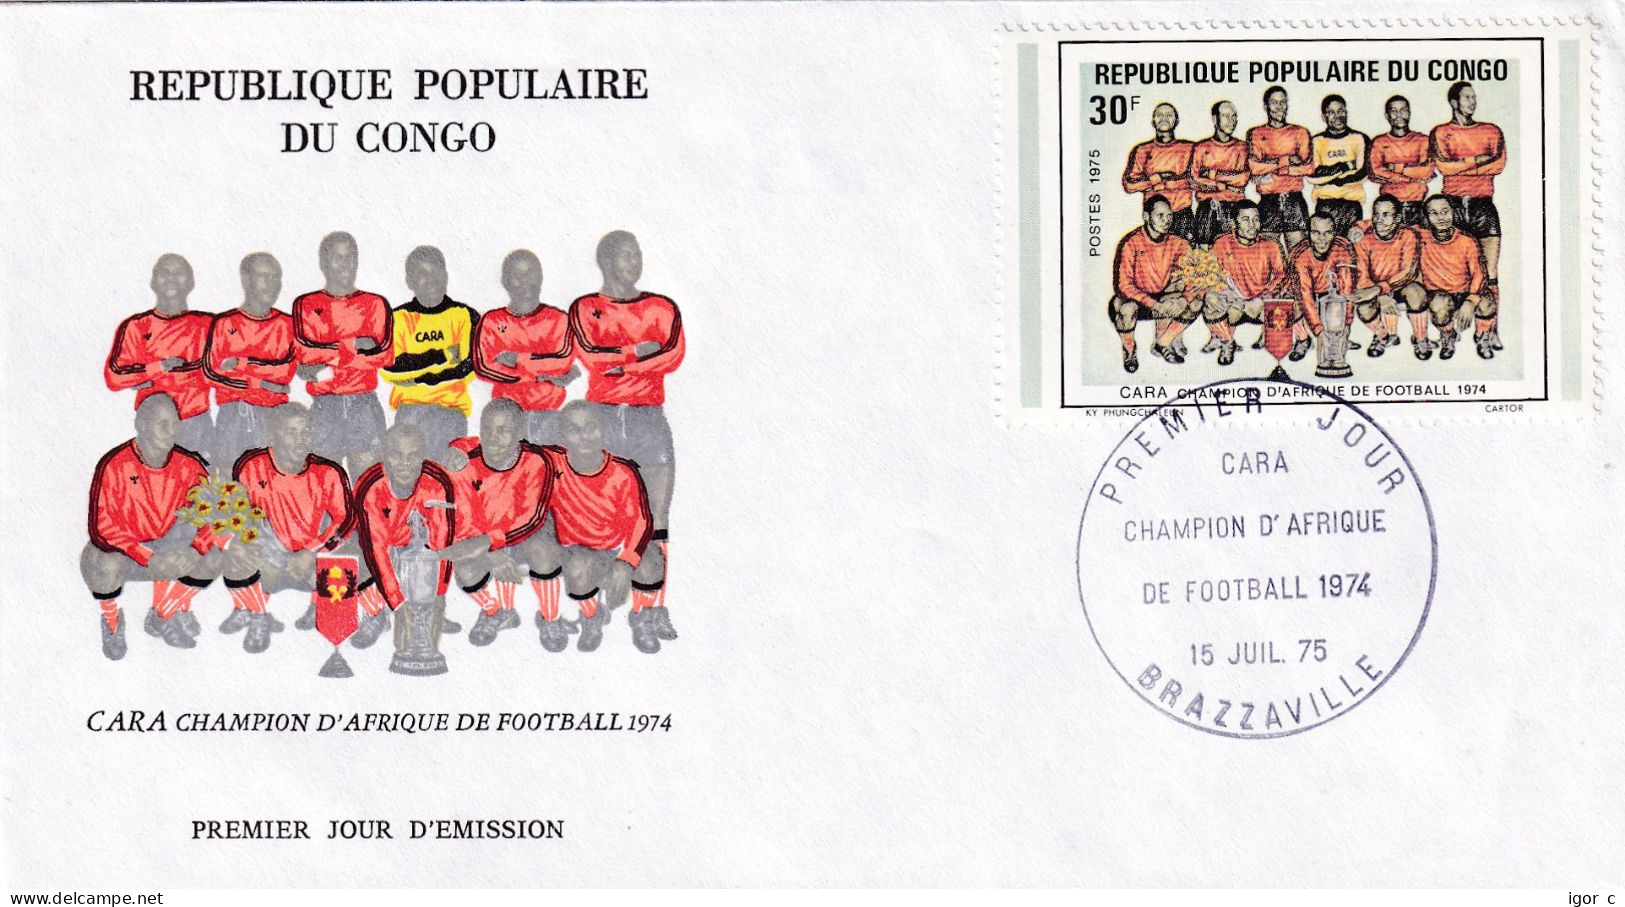 Congo Republ 1974 Cover: Football Soccer Fussball Calcio; African Cup; Congo Champion Team Photo - Africa Cup Of Nations